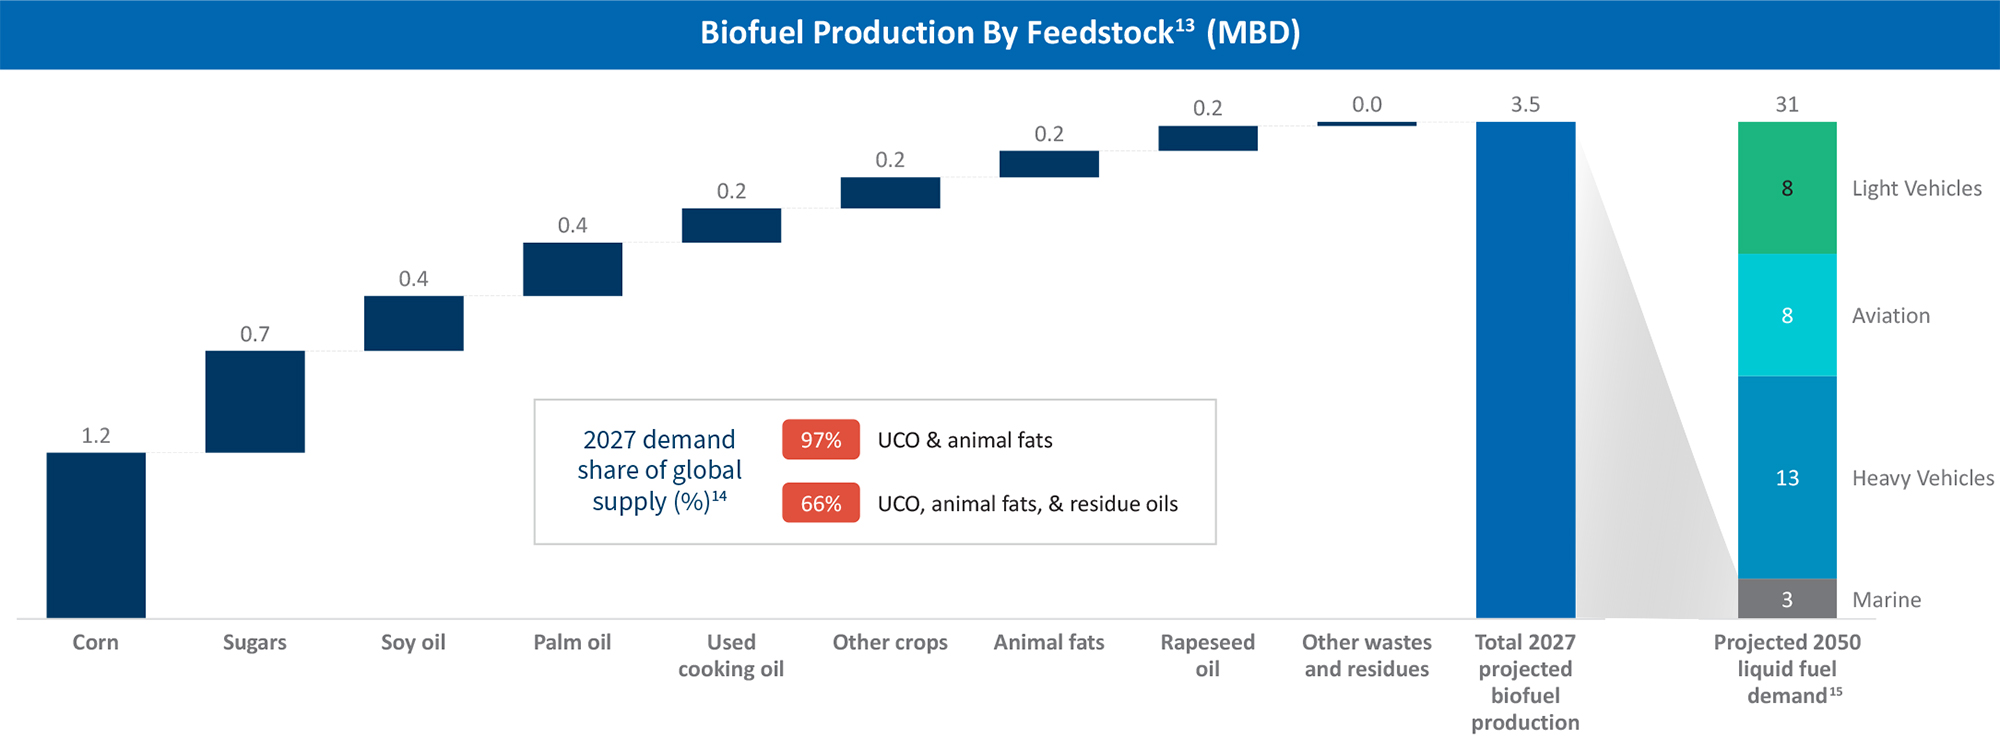 Biofuel Production Is Expected To Reach Feedstock Saturation at >65% of Worldwide Supply, Well Below Required Supply Levels for Traditional Liquid Fuel Replacement